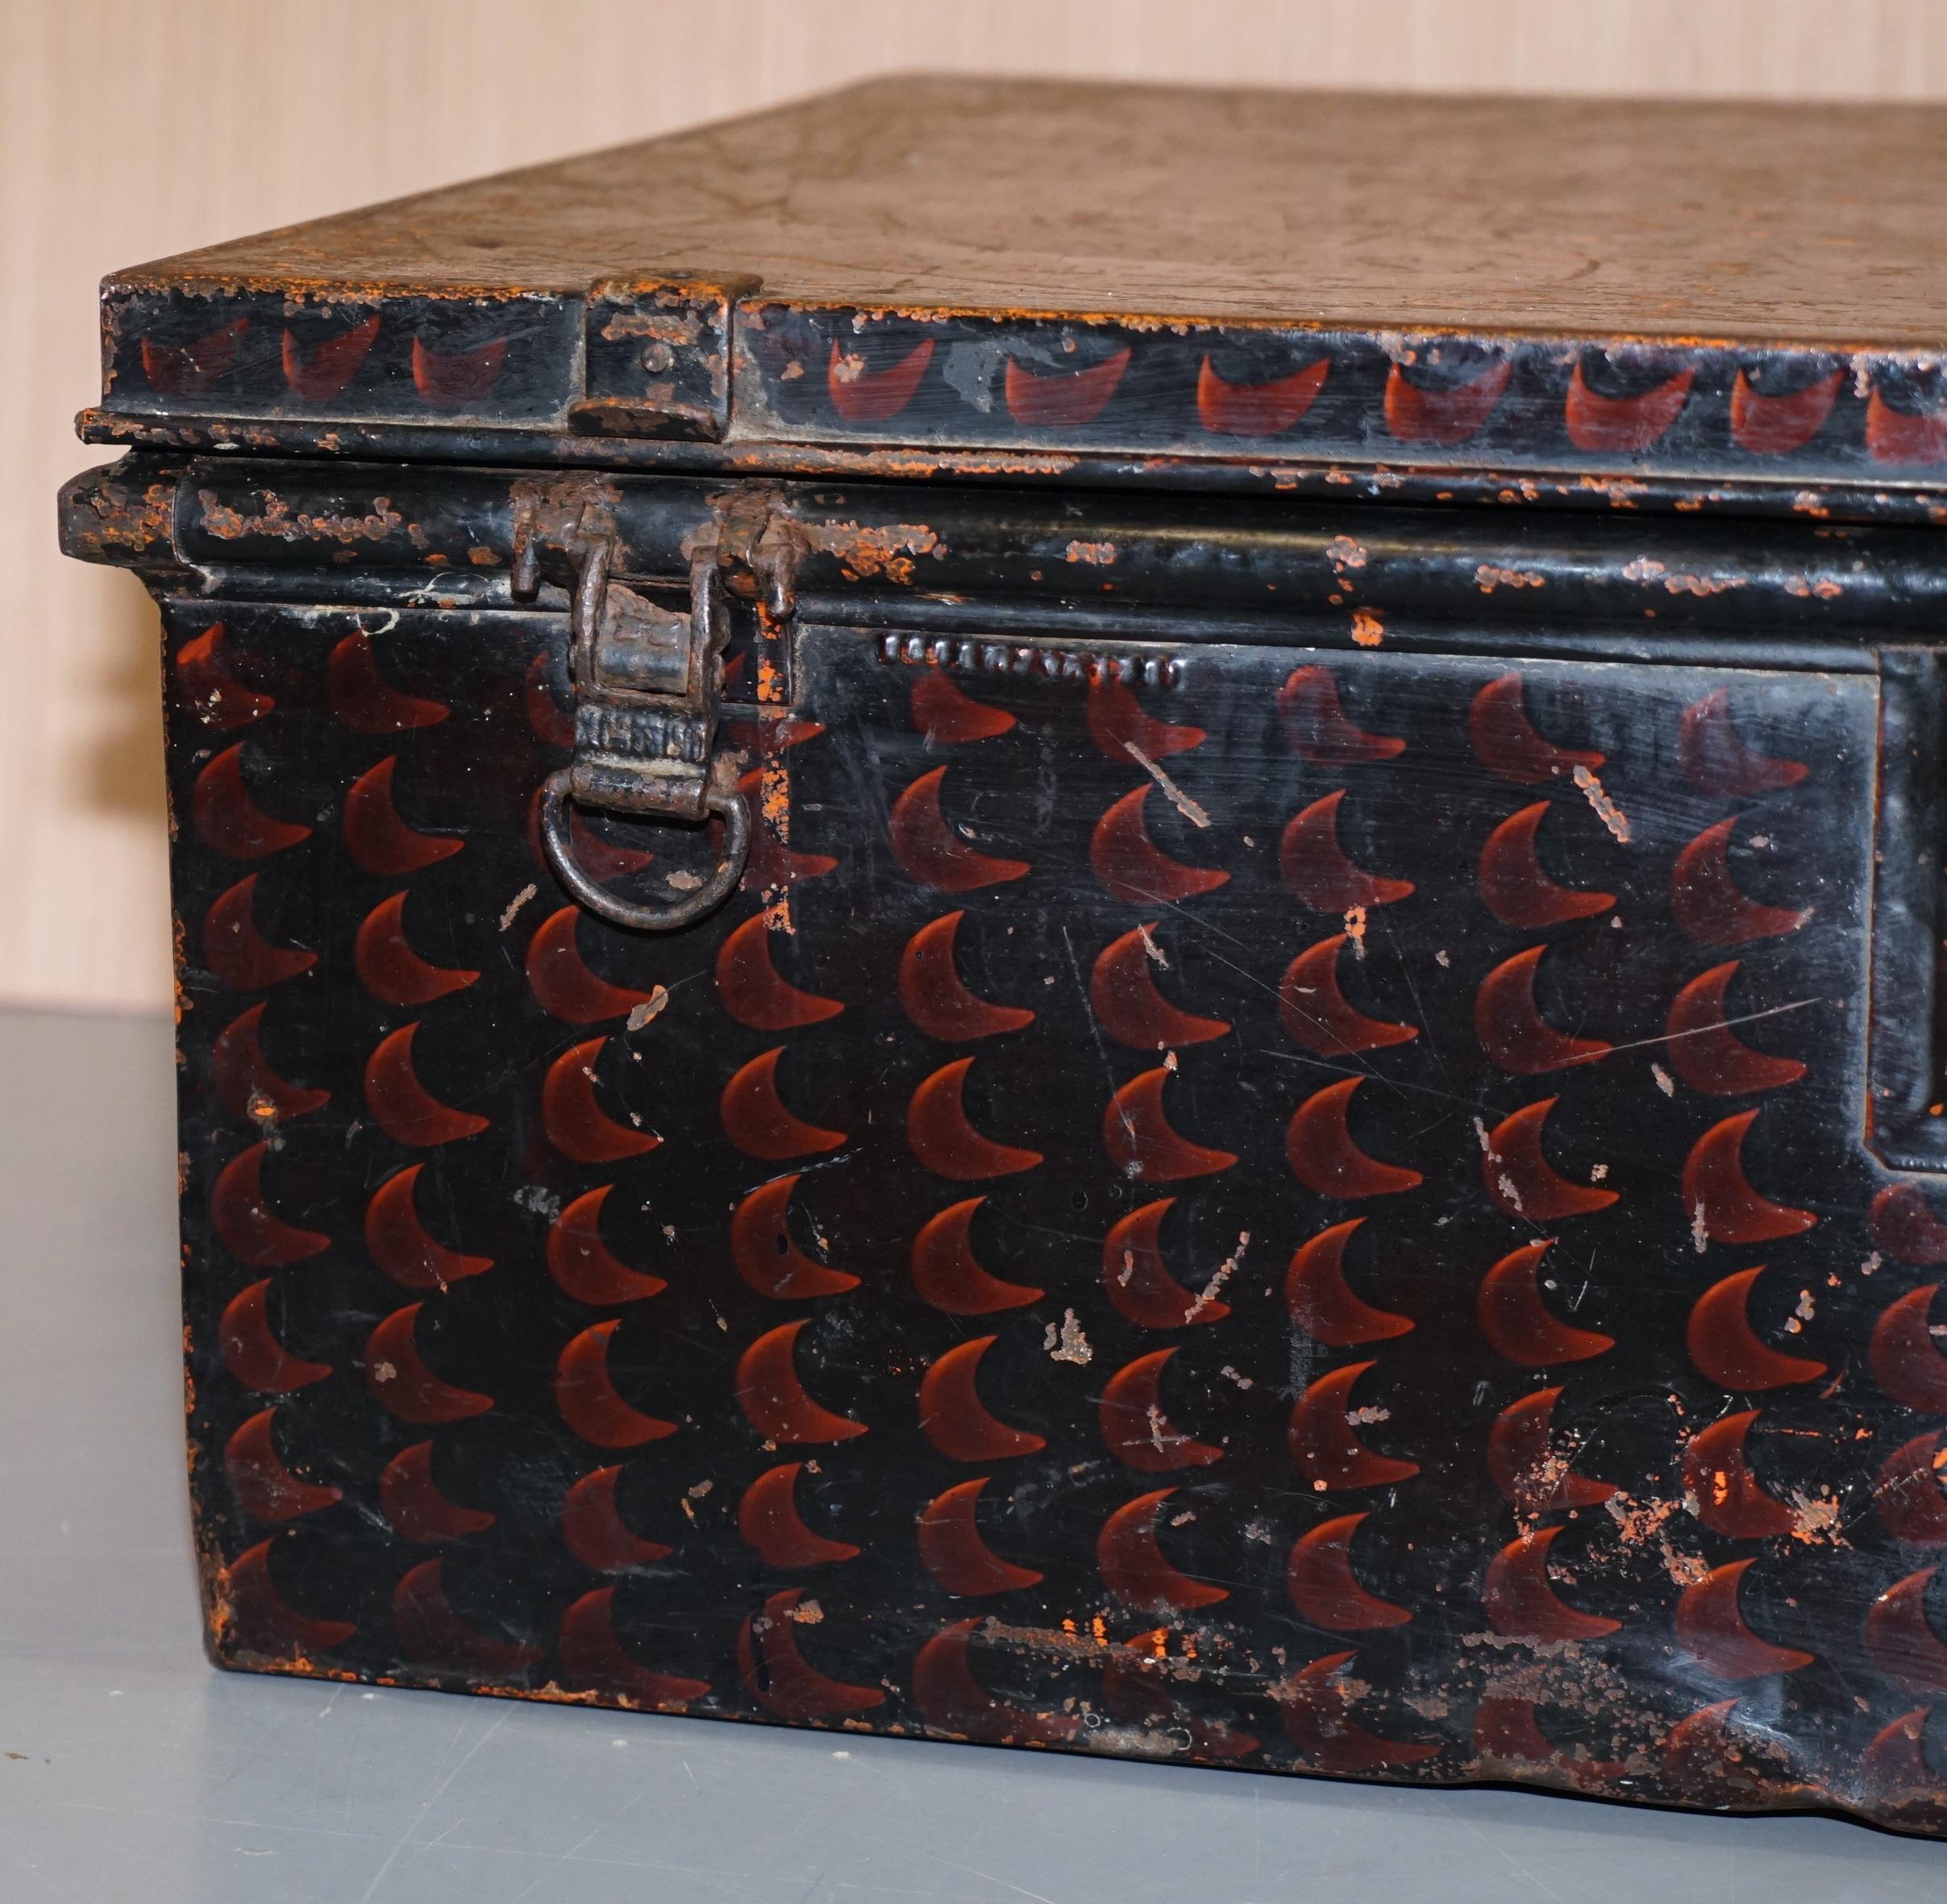 Steel Rare African Campaign Military Metal Chest Luggage the Owomeji Jones Brothers For Sale